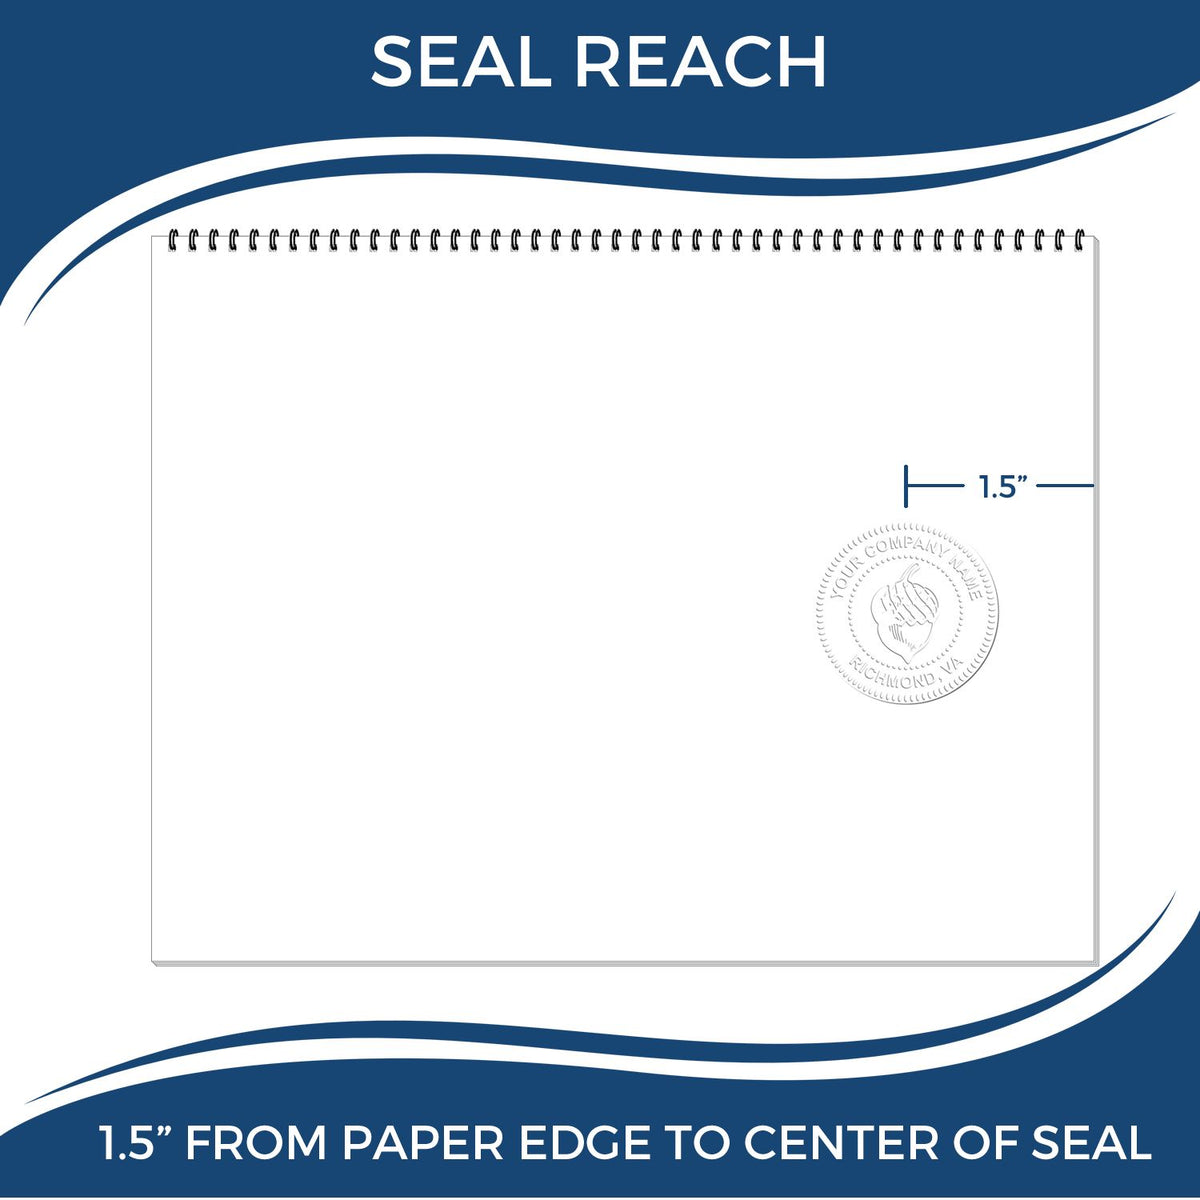 An infographic showing the seal reach which is represented by a ruler and a miniature seal image of the Connecticut Engineer Desk Seal